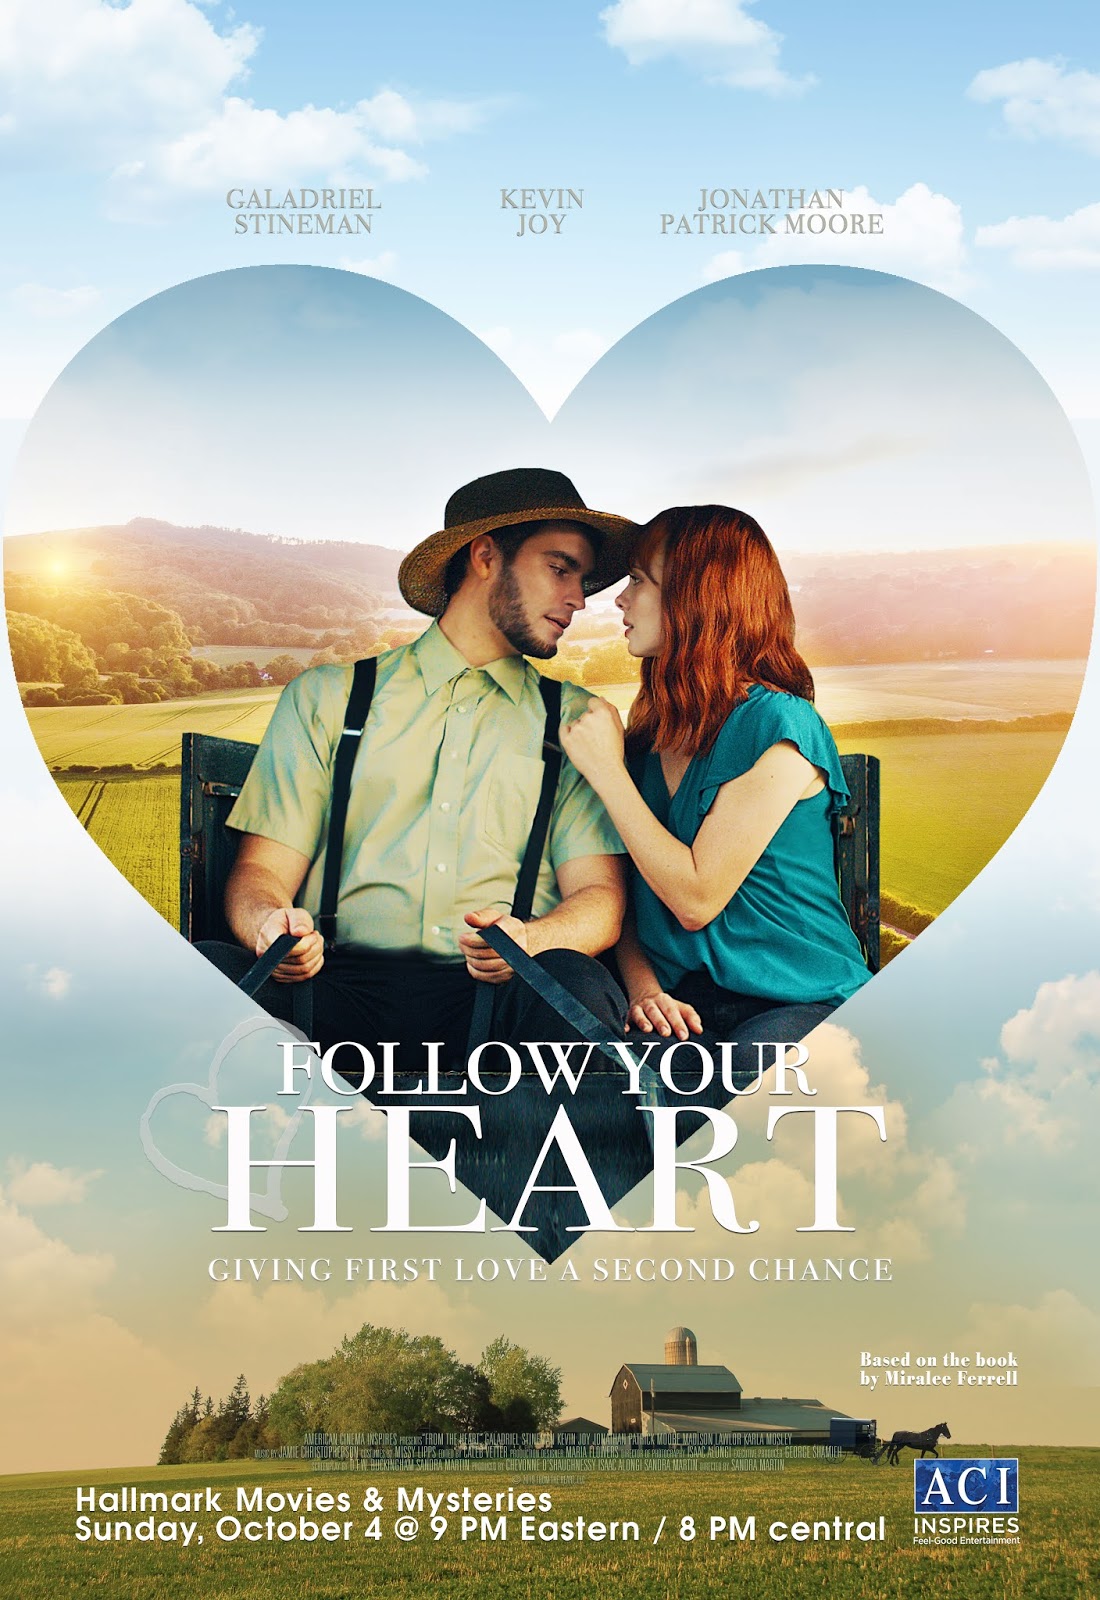 Woven by Words Follow Your Heart On Hallmark Movies & Mysteries